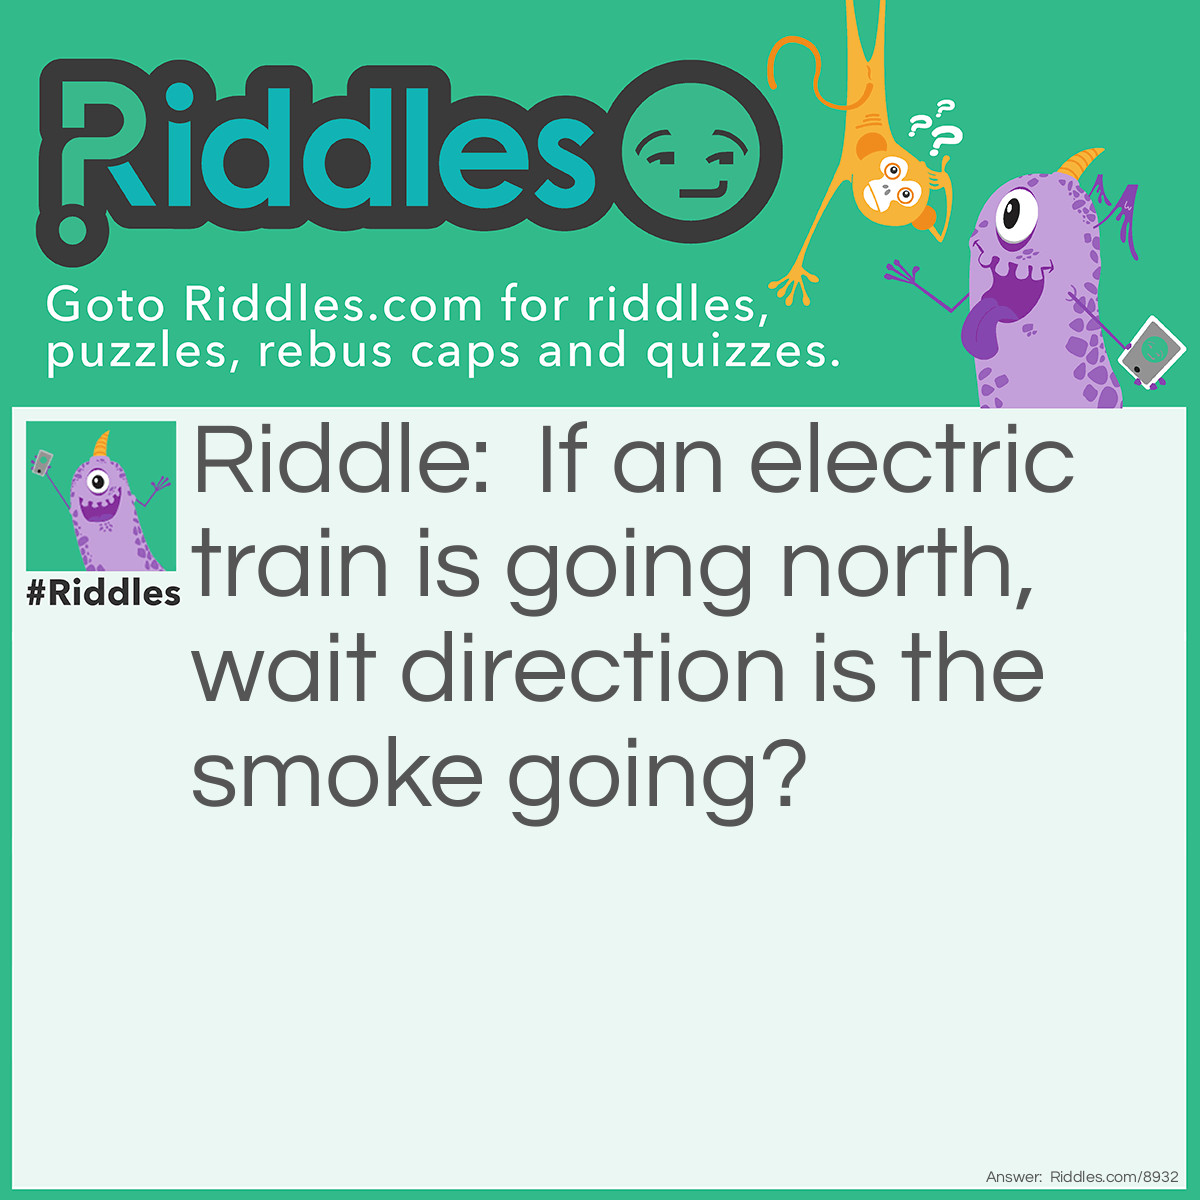 Riddle: If an electric train is going north, wait direction is the smoke going? Answer: Nowhere. The train is electric so no smoke.